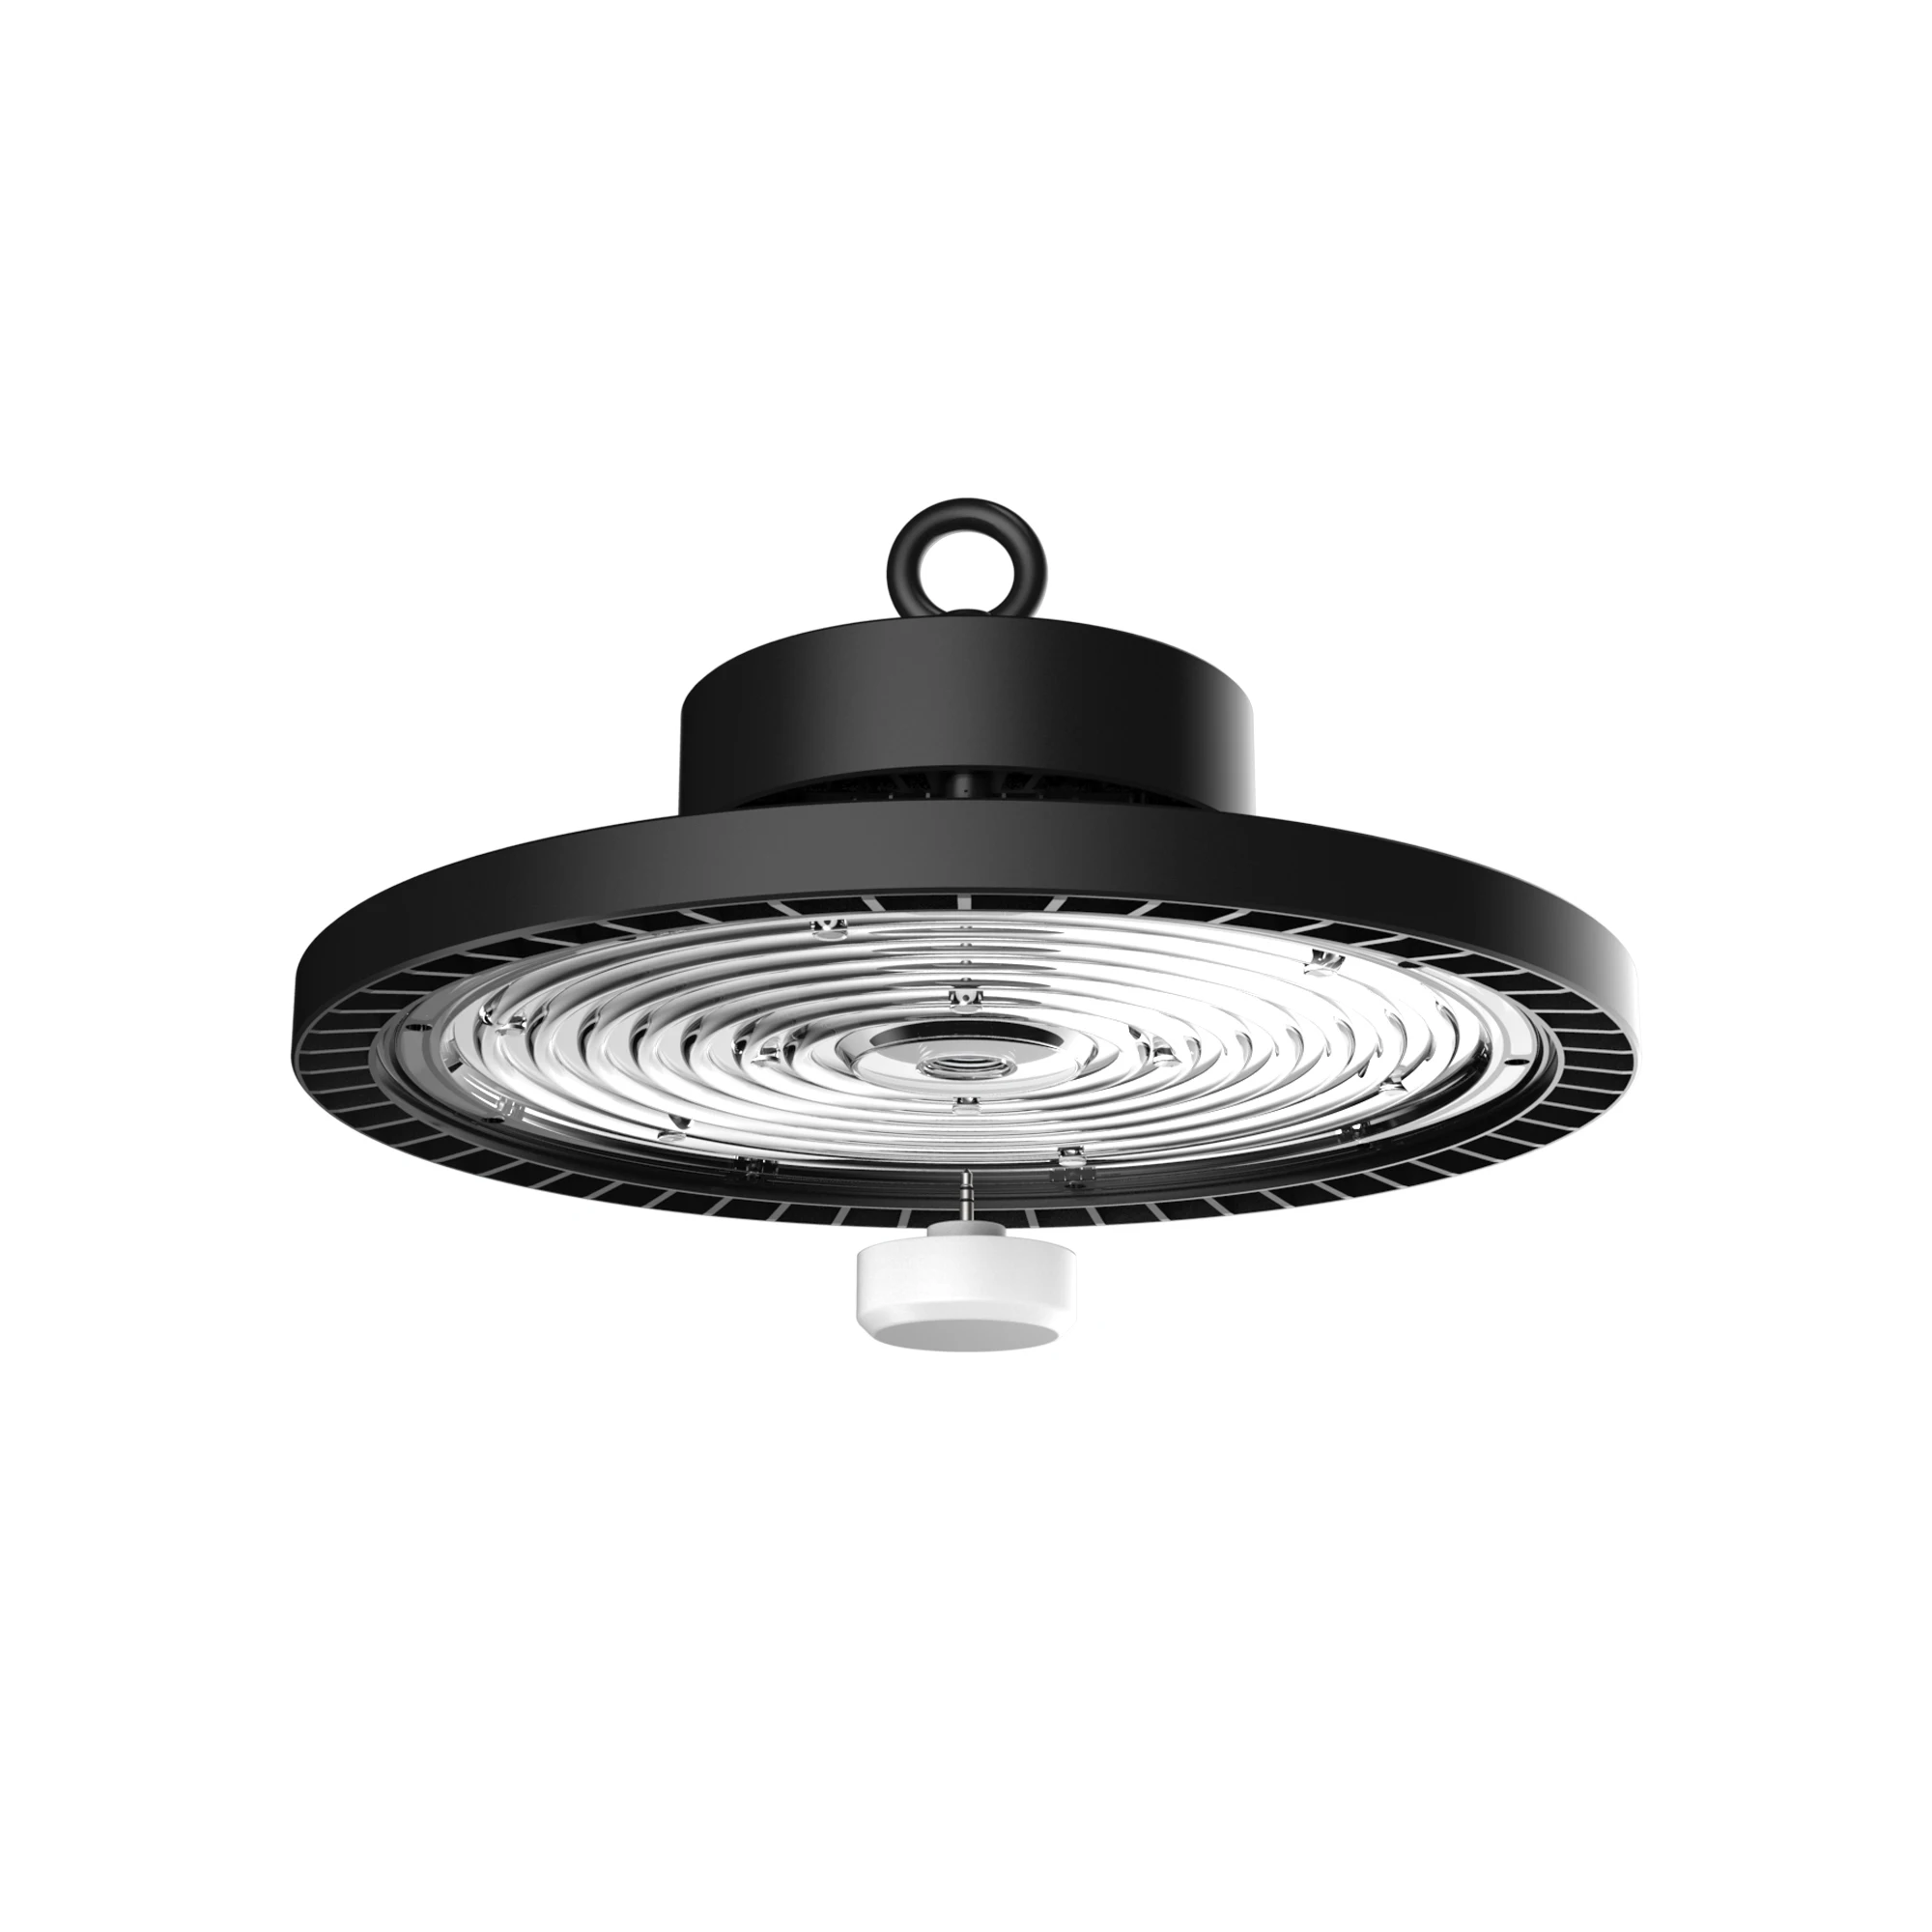 Constant lux IP65 80W 100W 120W 150W 200W dimmable LED UFO highbay warehouse light